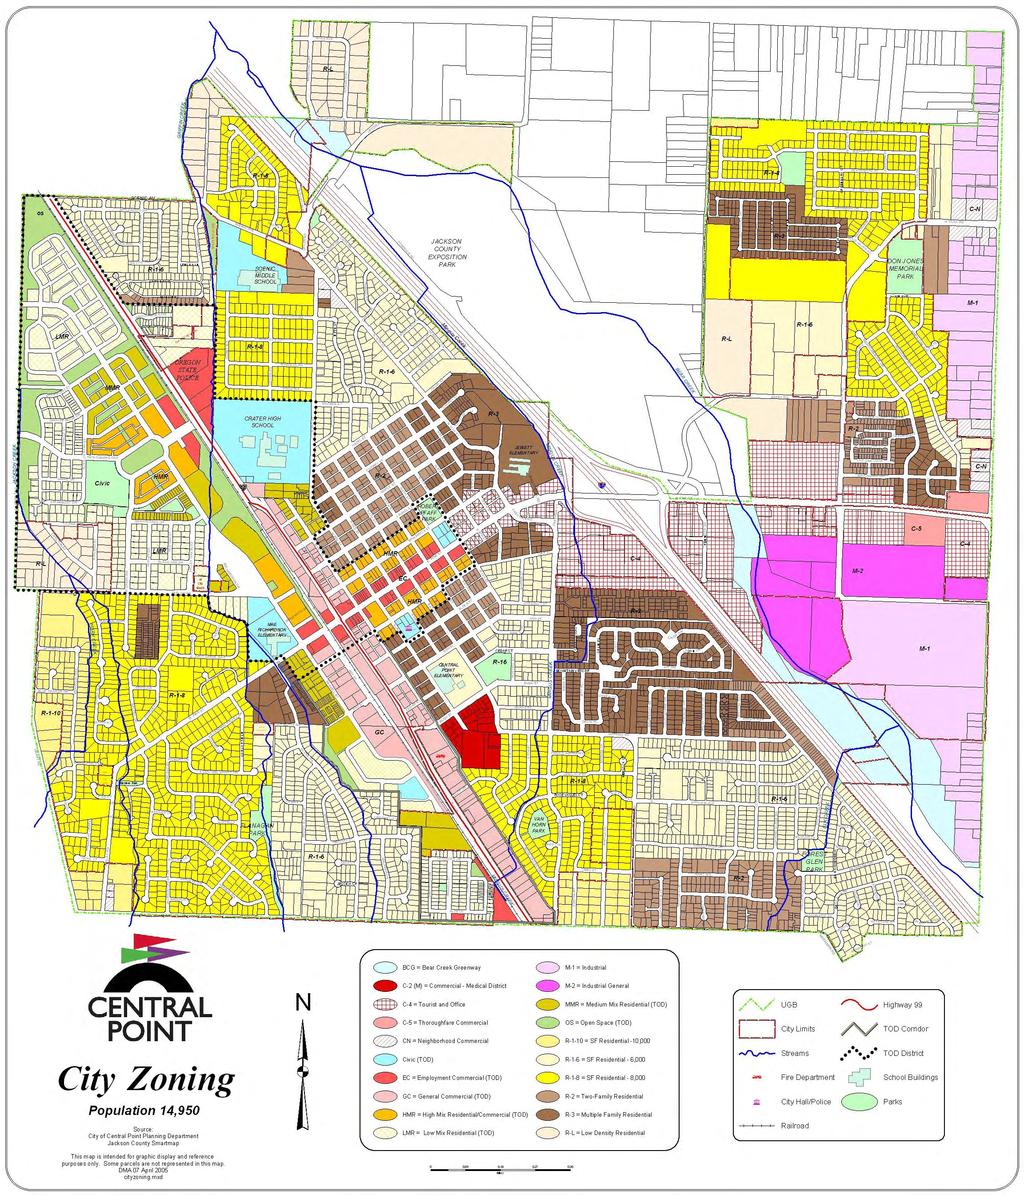 http://www.ci.central-point.or.us/images/bigcityzoning.